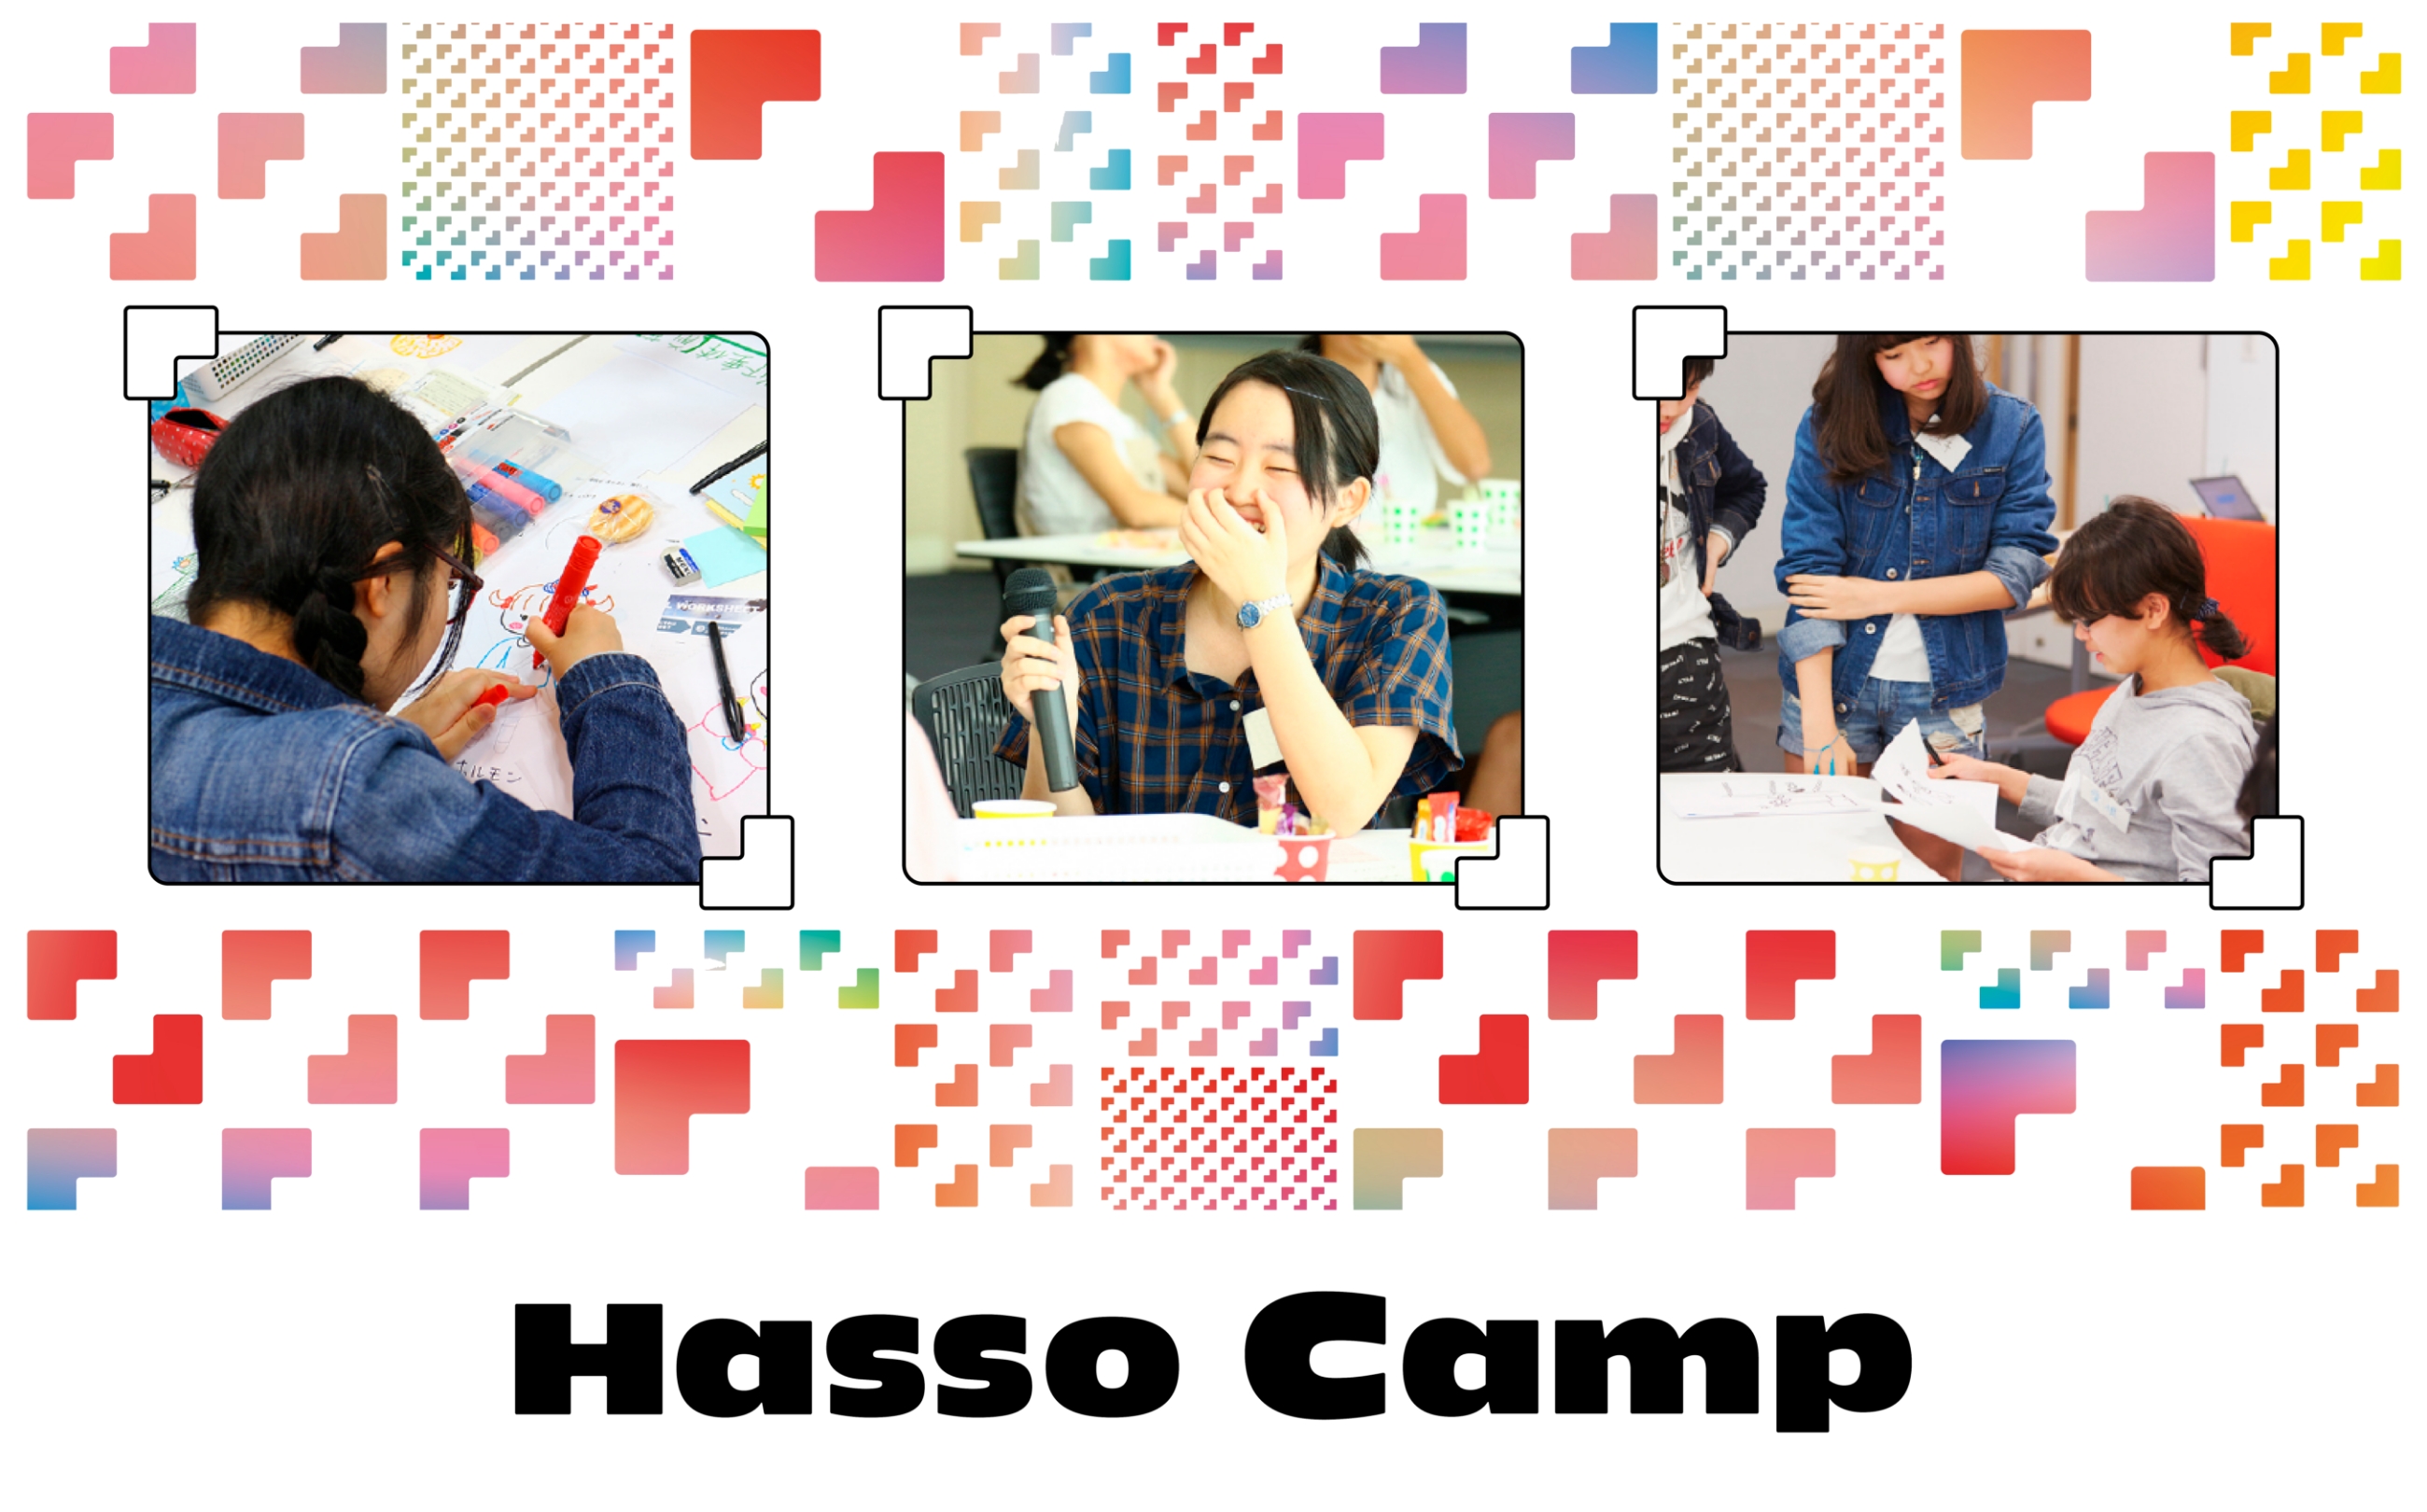 Hasso Camp